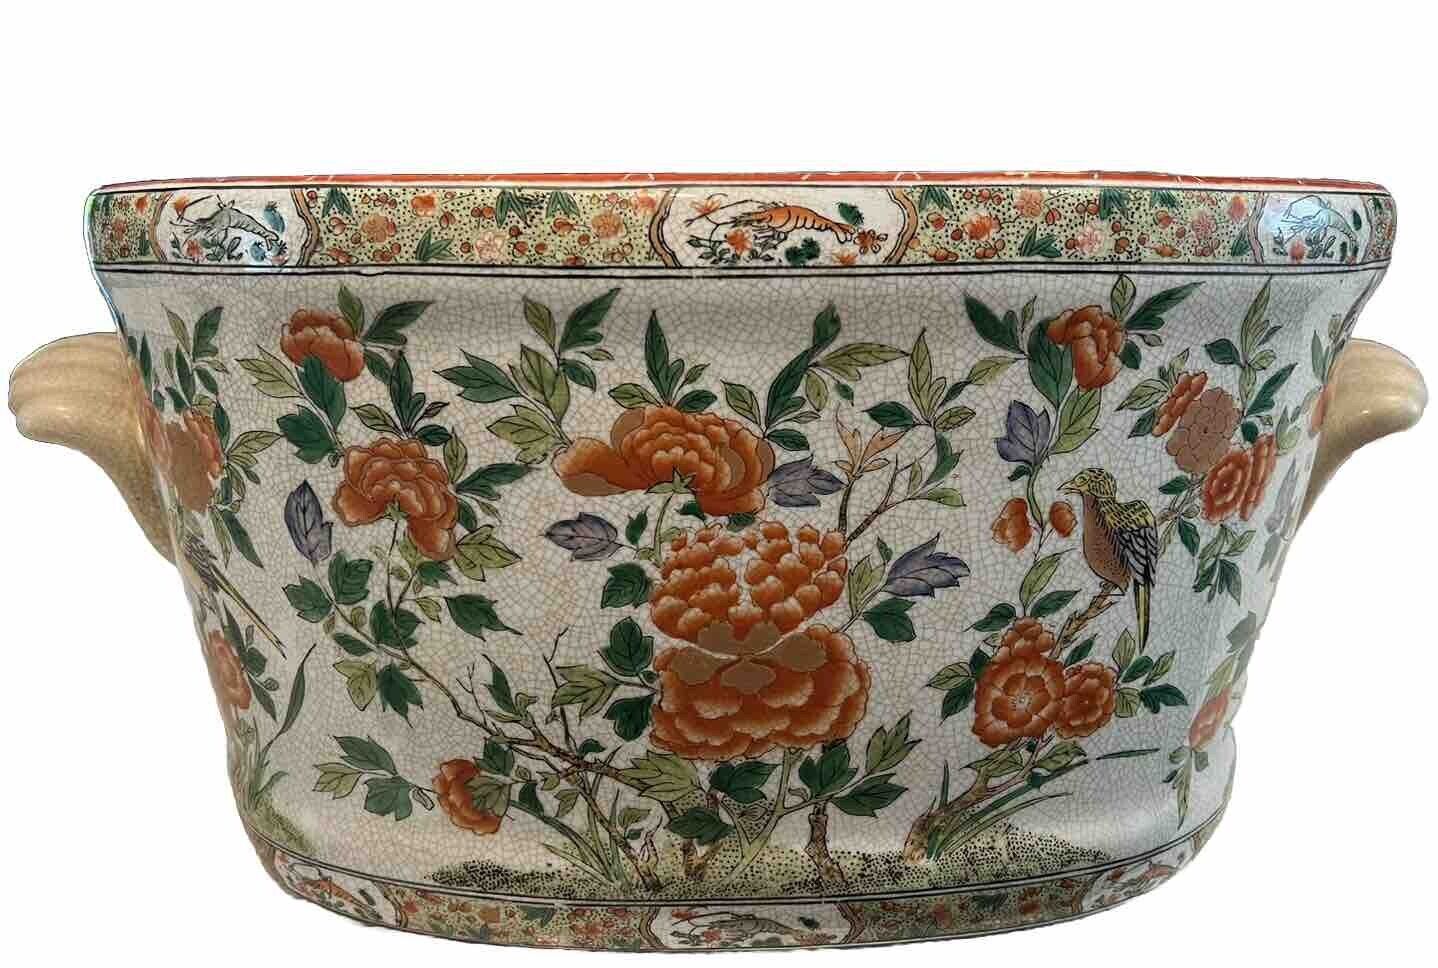 Antique Chinese Foot Bath Hand Painted Porcelain UW United Wilson 1897 Vintage